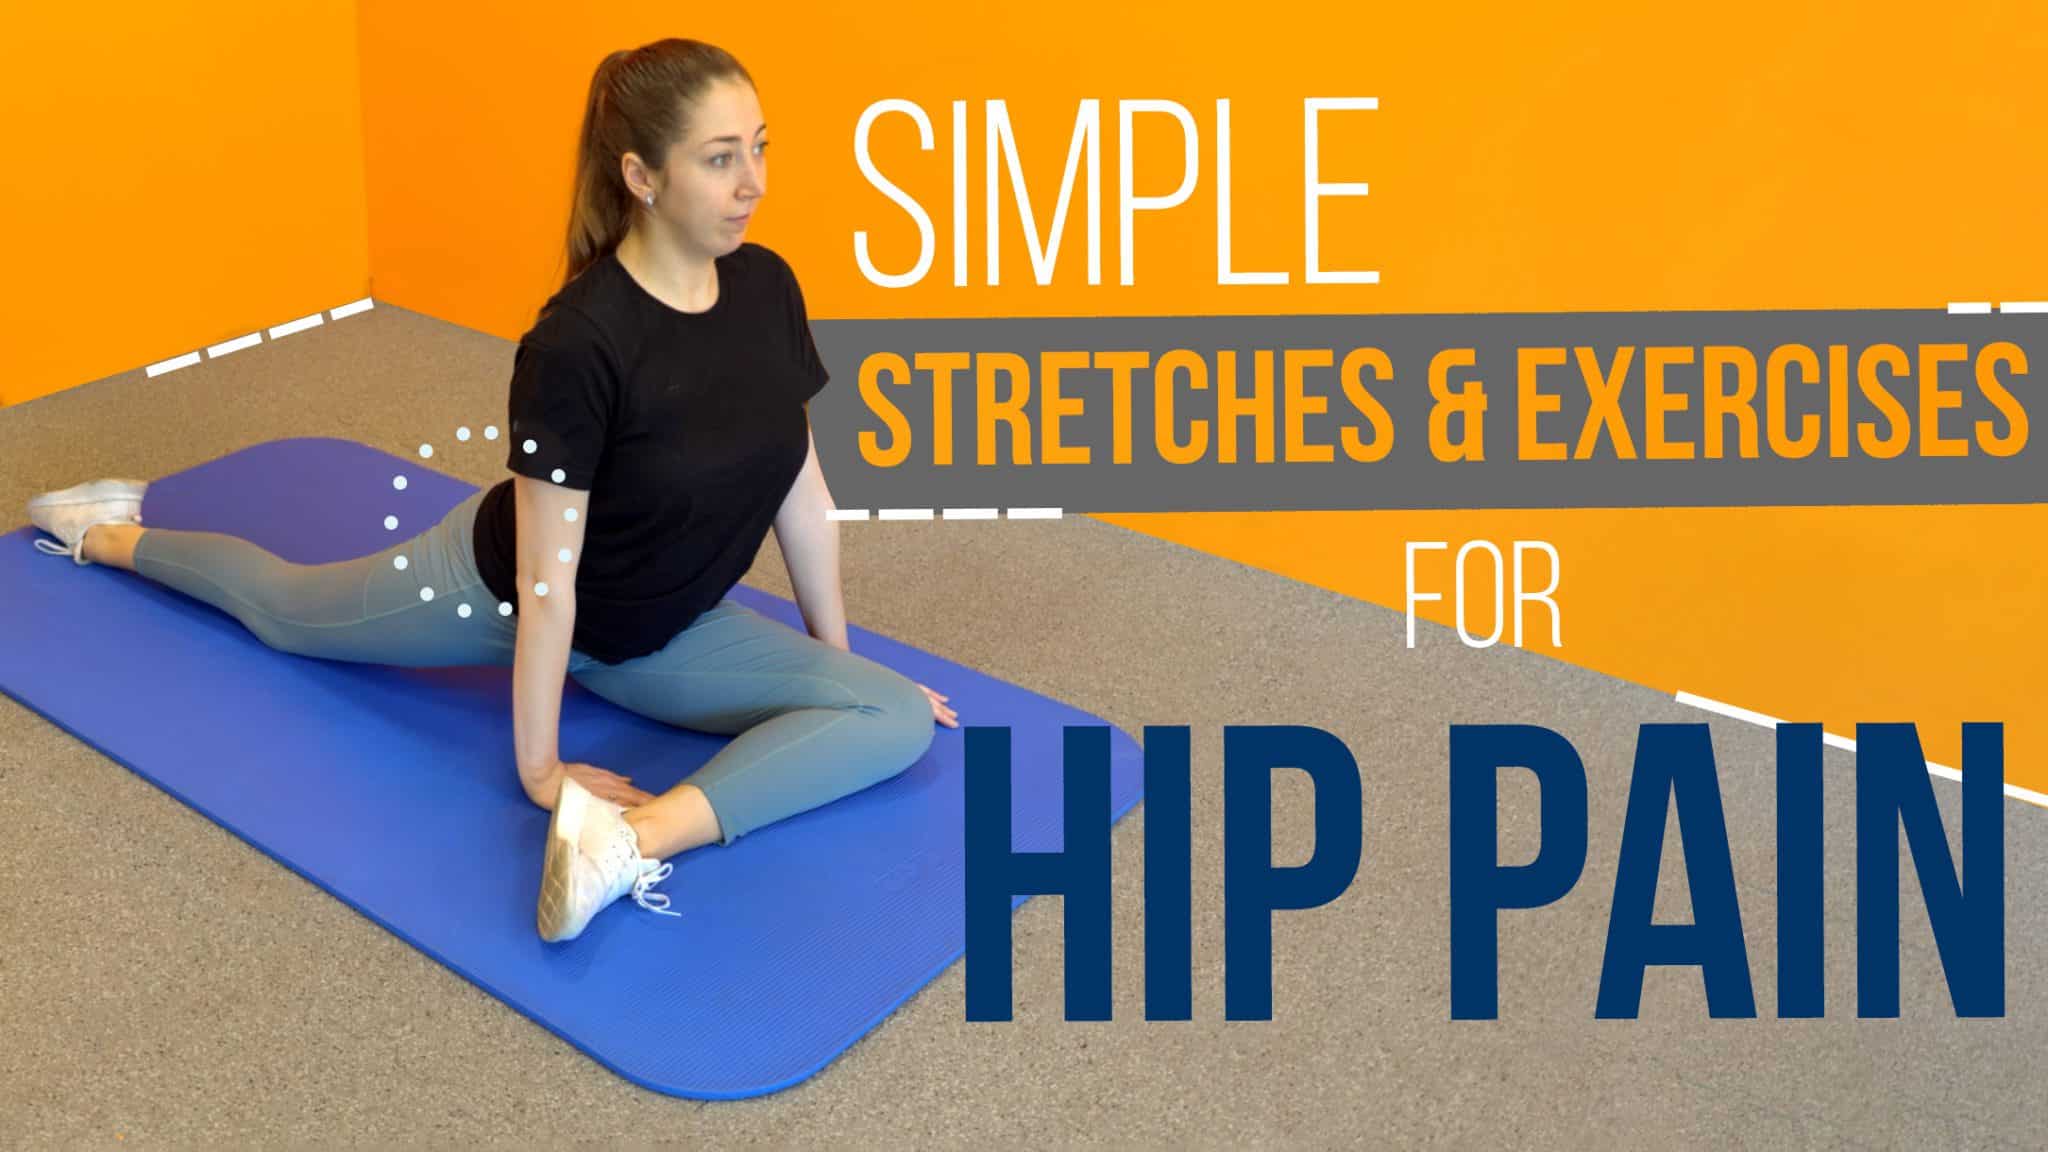 Top 3 Exercises and Stretches for Hip Pain - AIRROSTI